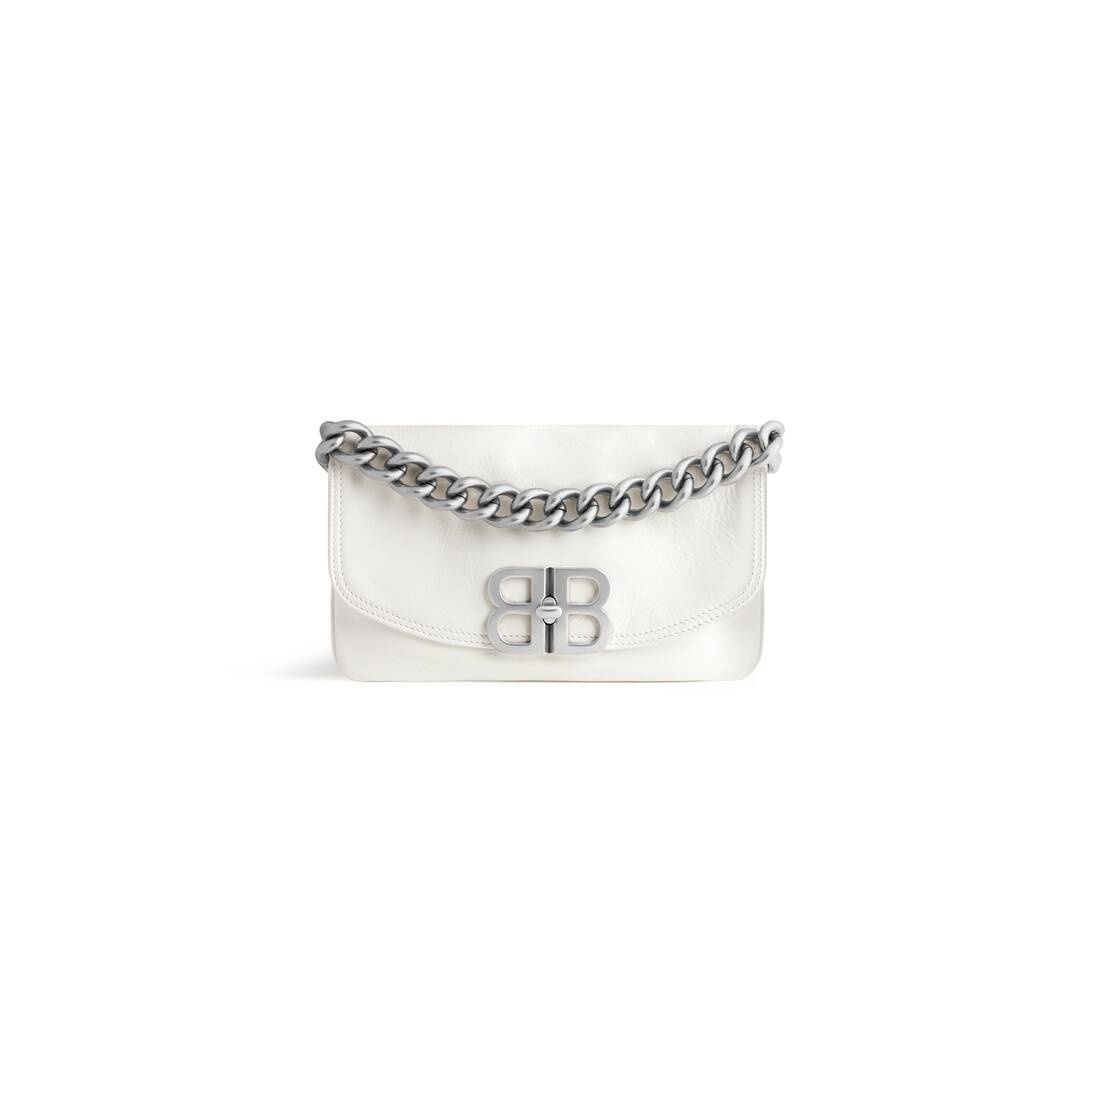 Women's Bb Soft Small Flap Bag  in Optic White - 1